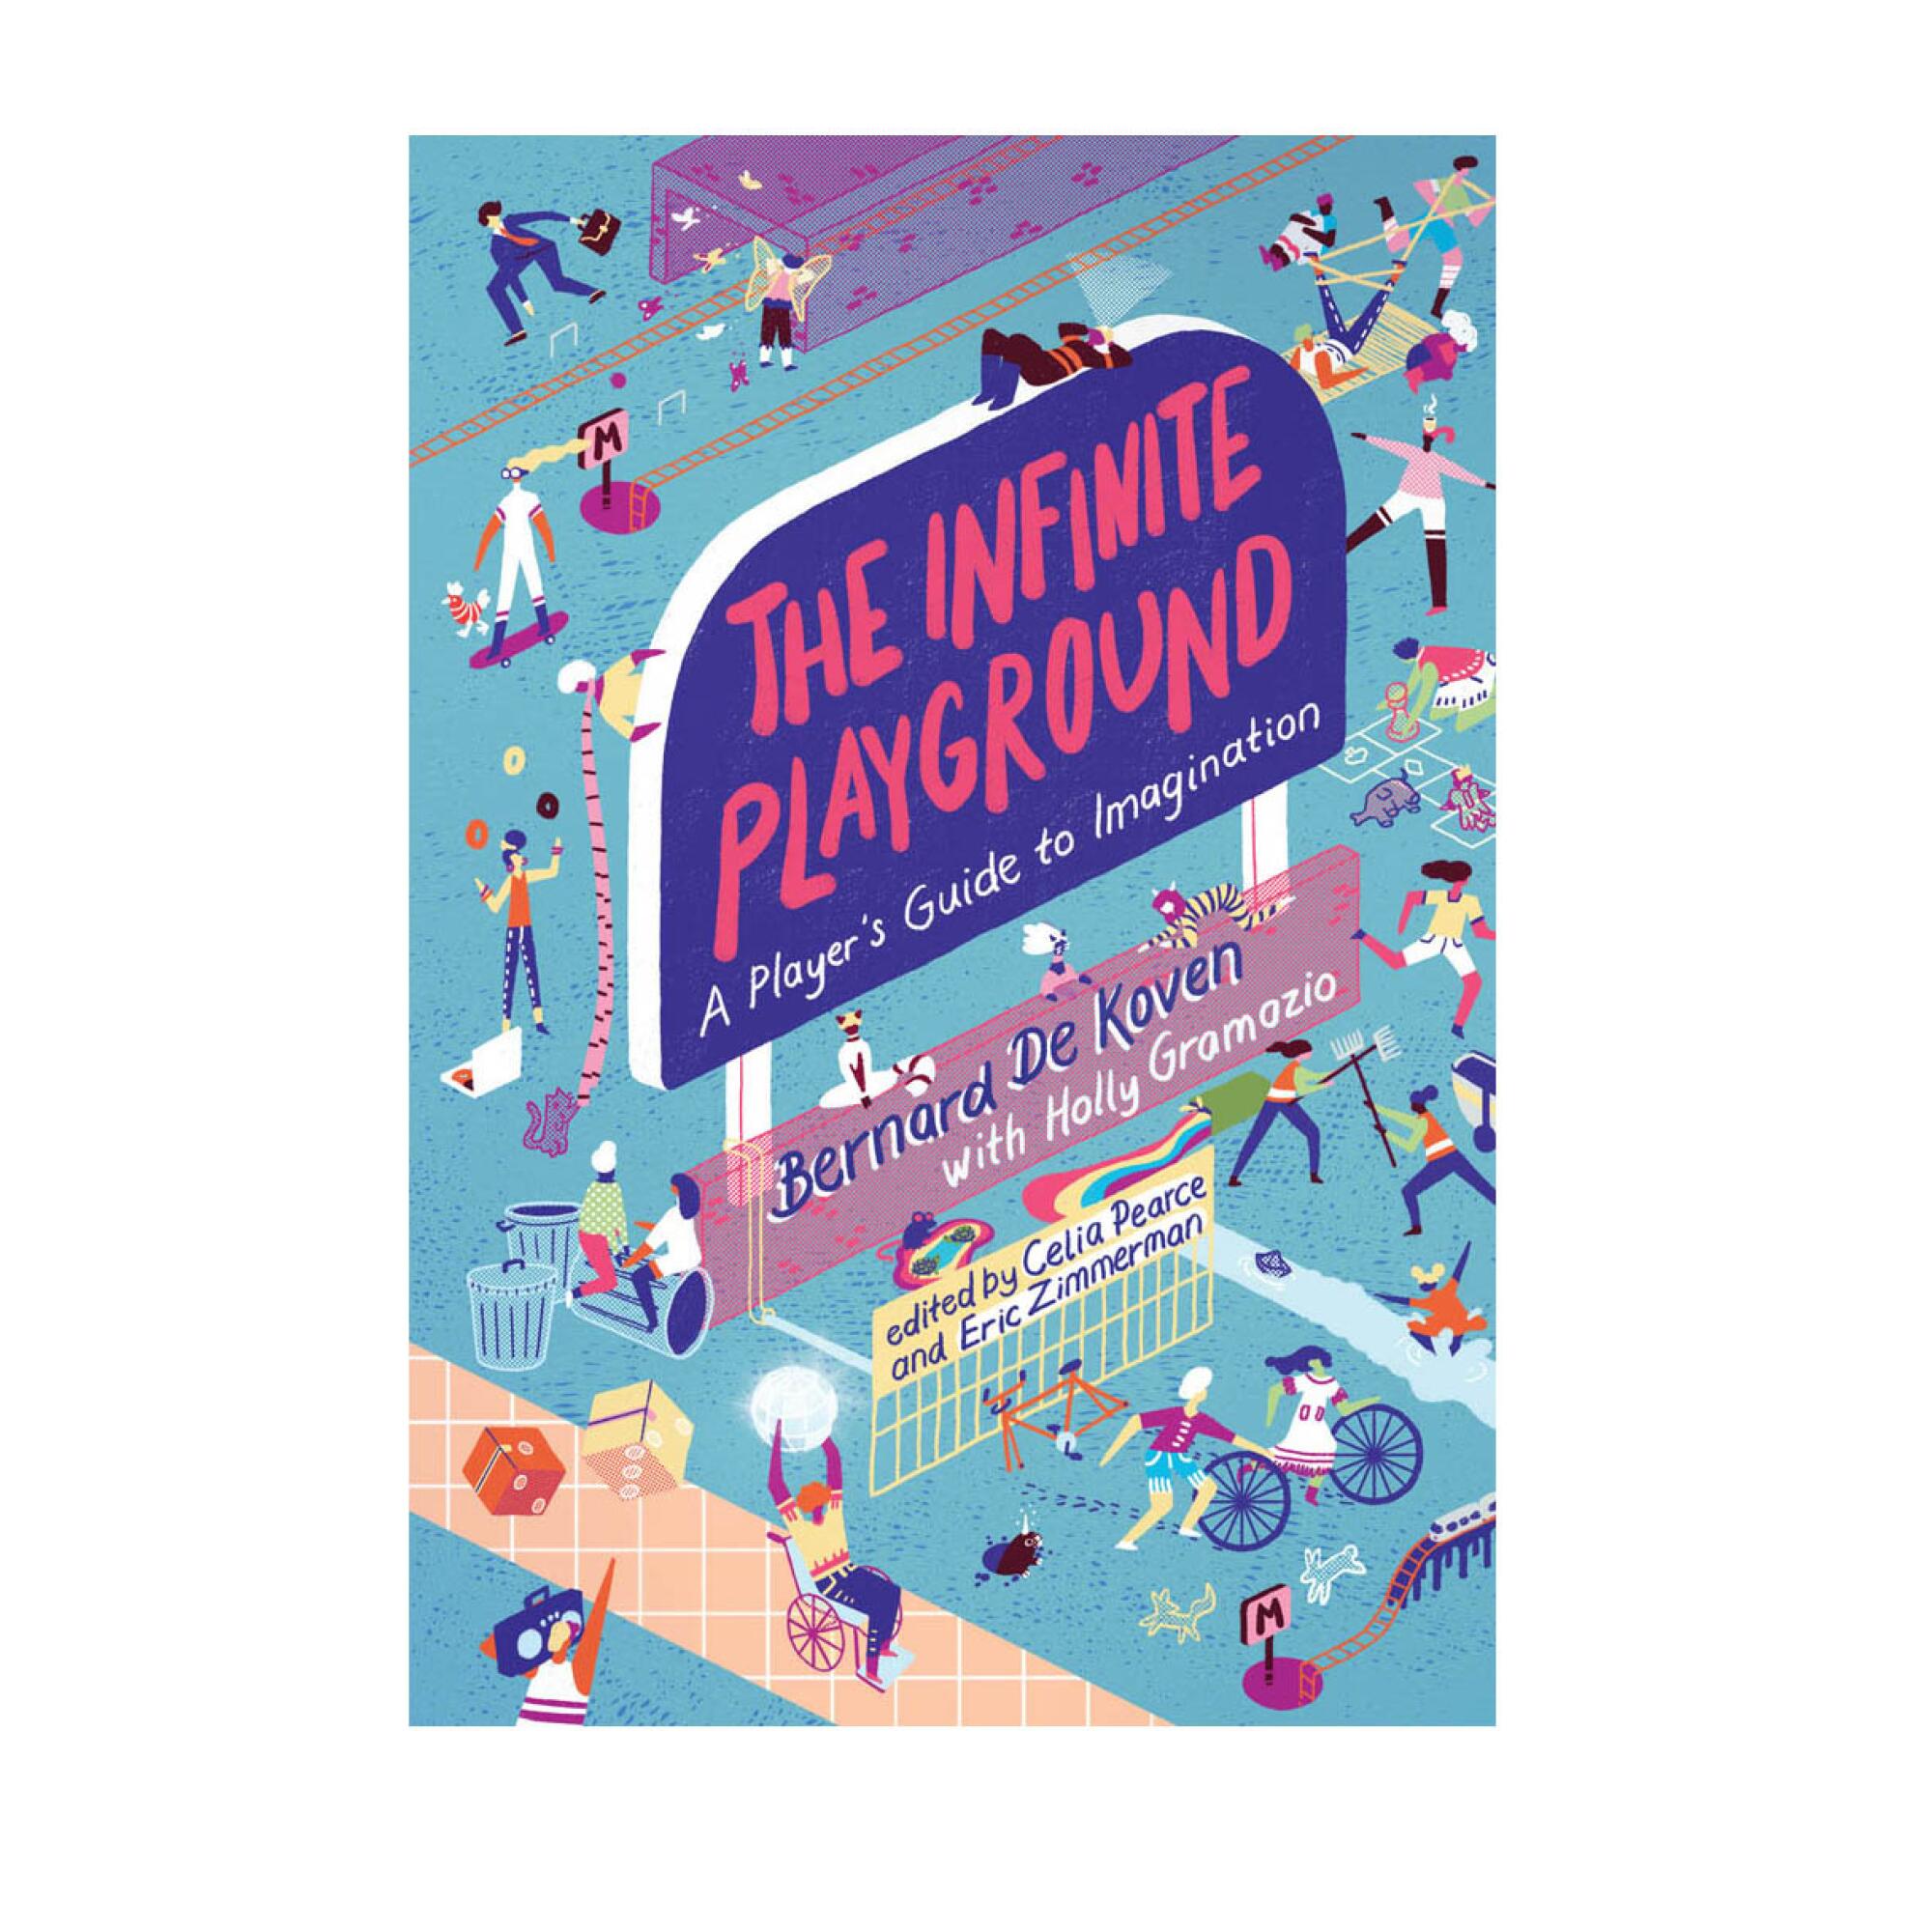 "The Infinite Playground" package features people biking, walking, playing, juggling and more.